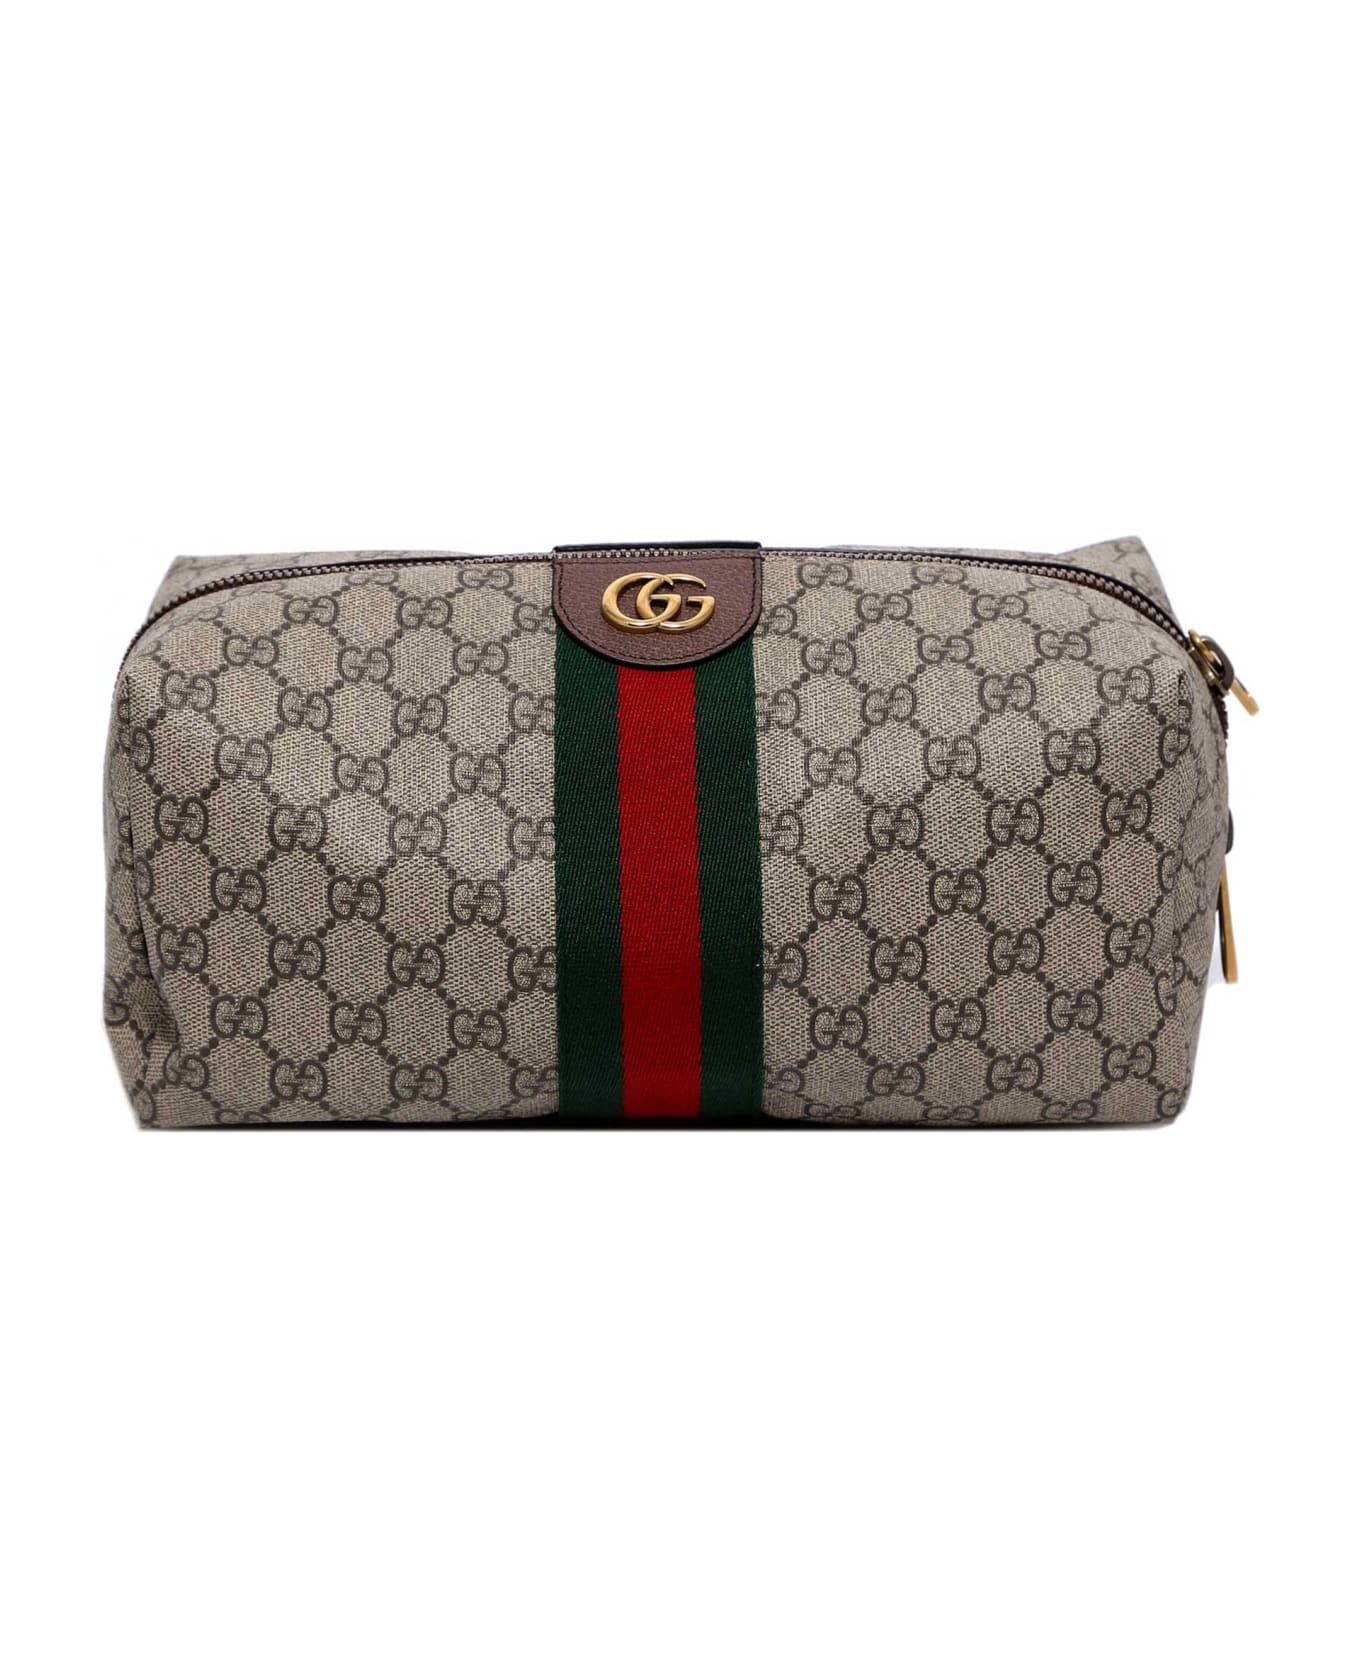 Gucci L Toyl.c. M Ophidia Gg Sup So. - Beige トラベルバッグ